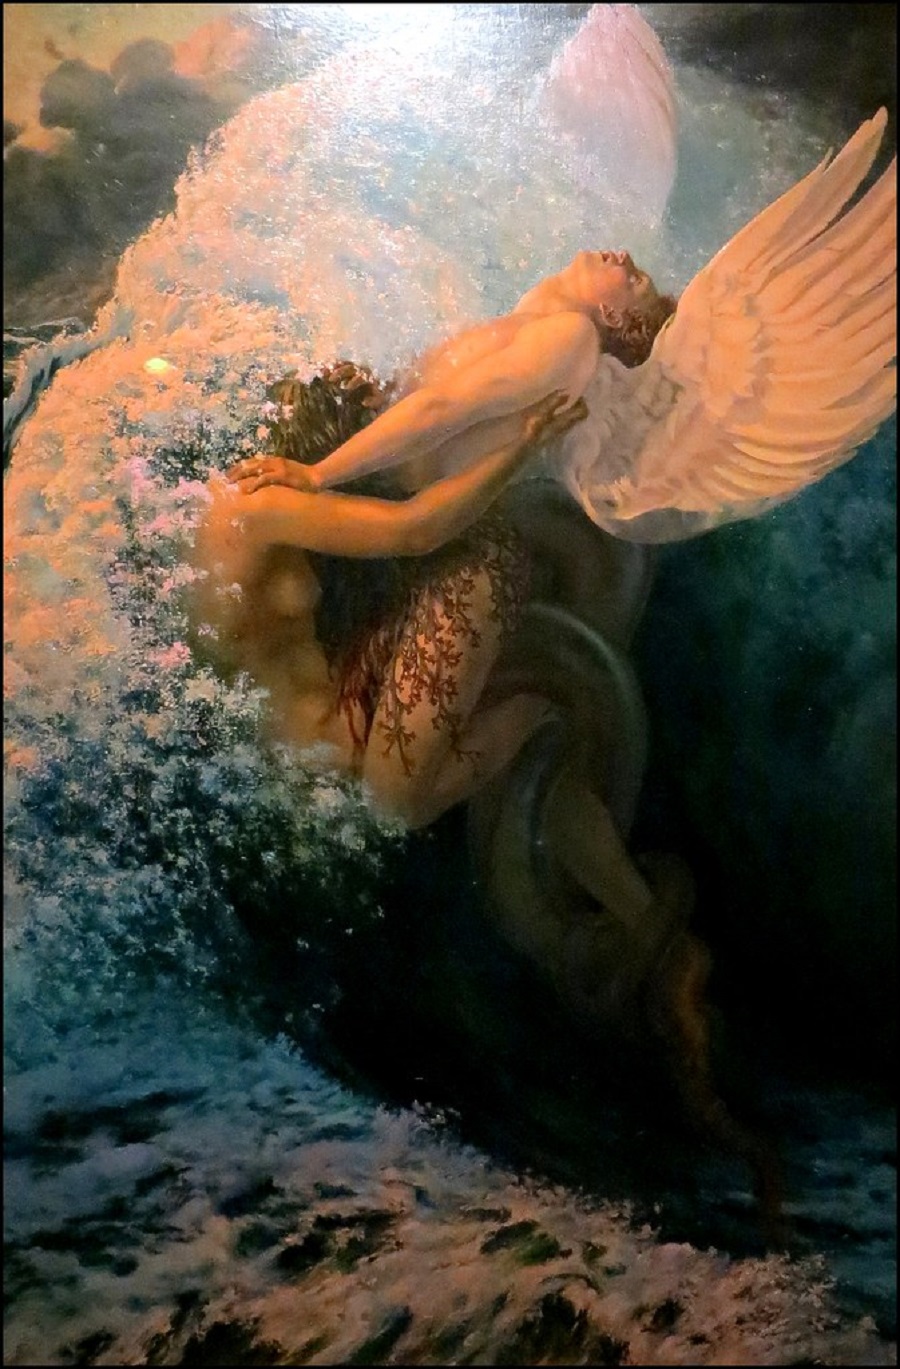 Carlos Schwabe's "Spleen et Idéal" was created in 1907 and depicts two figures engaged in sexual activity. This forms part of the "Spleen et Ideal" series | Read more on AcademiaAesthetics.com